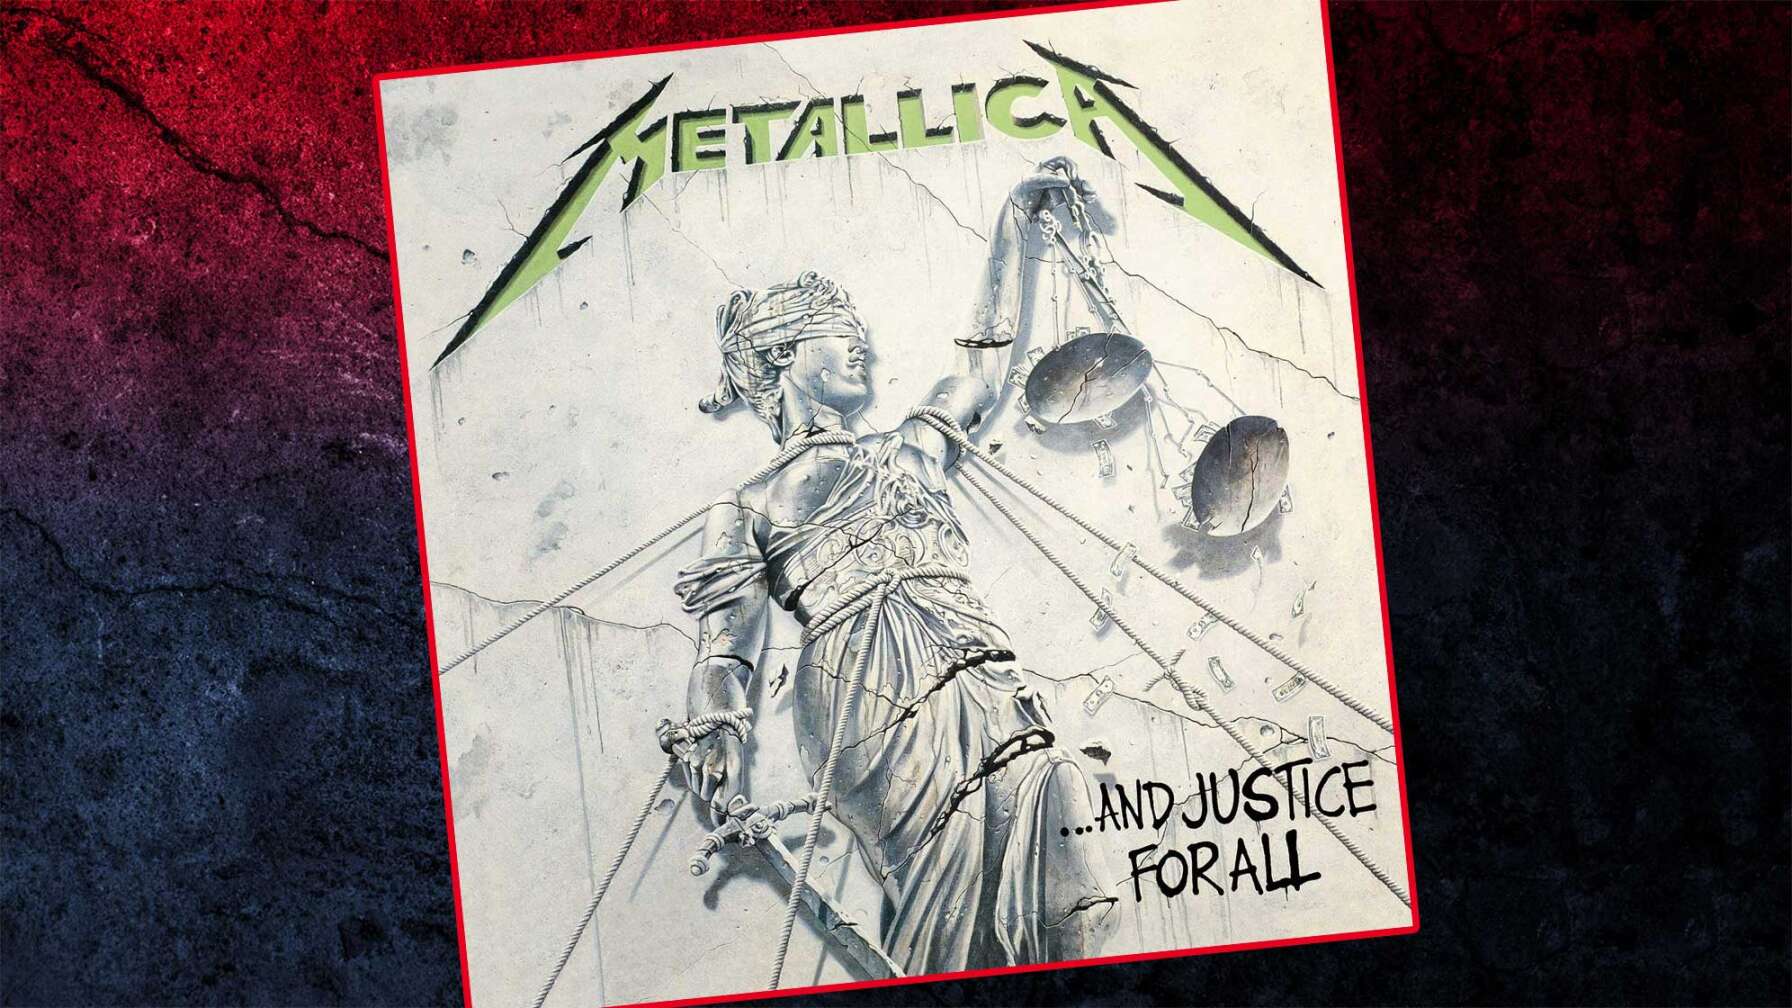 Das Albumcover von Metallcas "...And Justice For All"